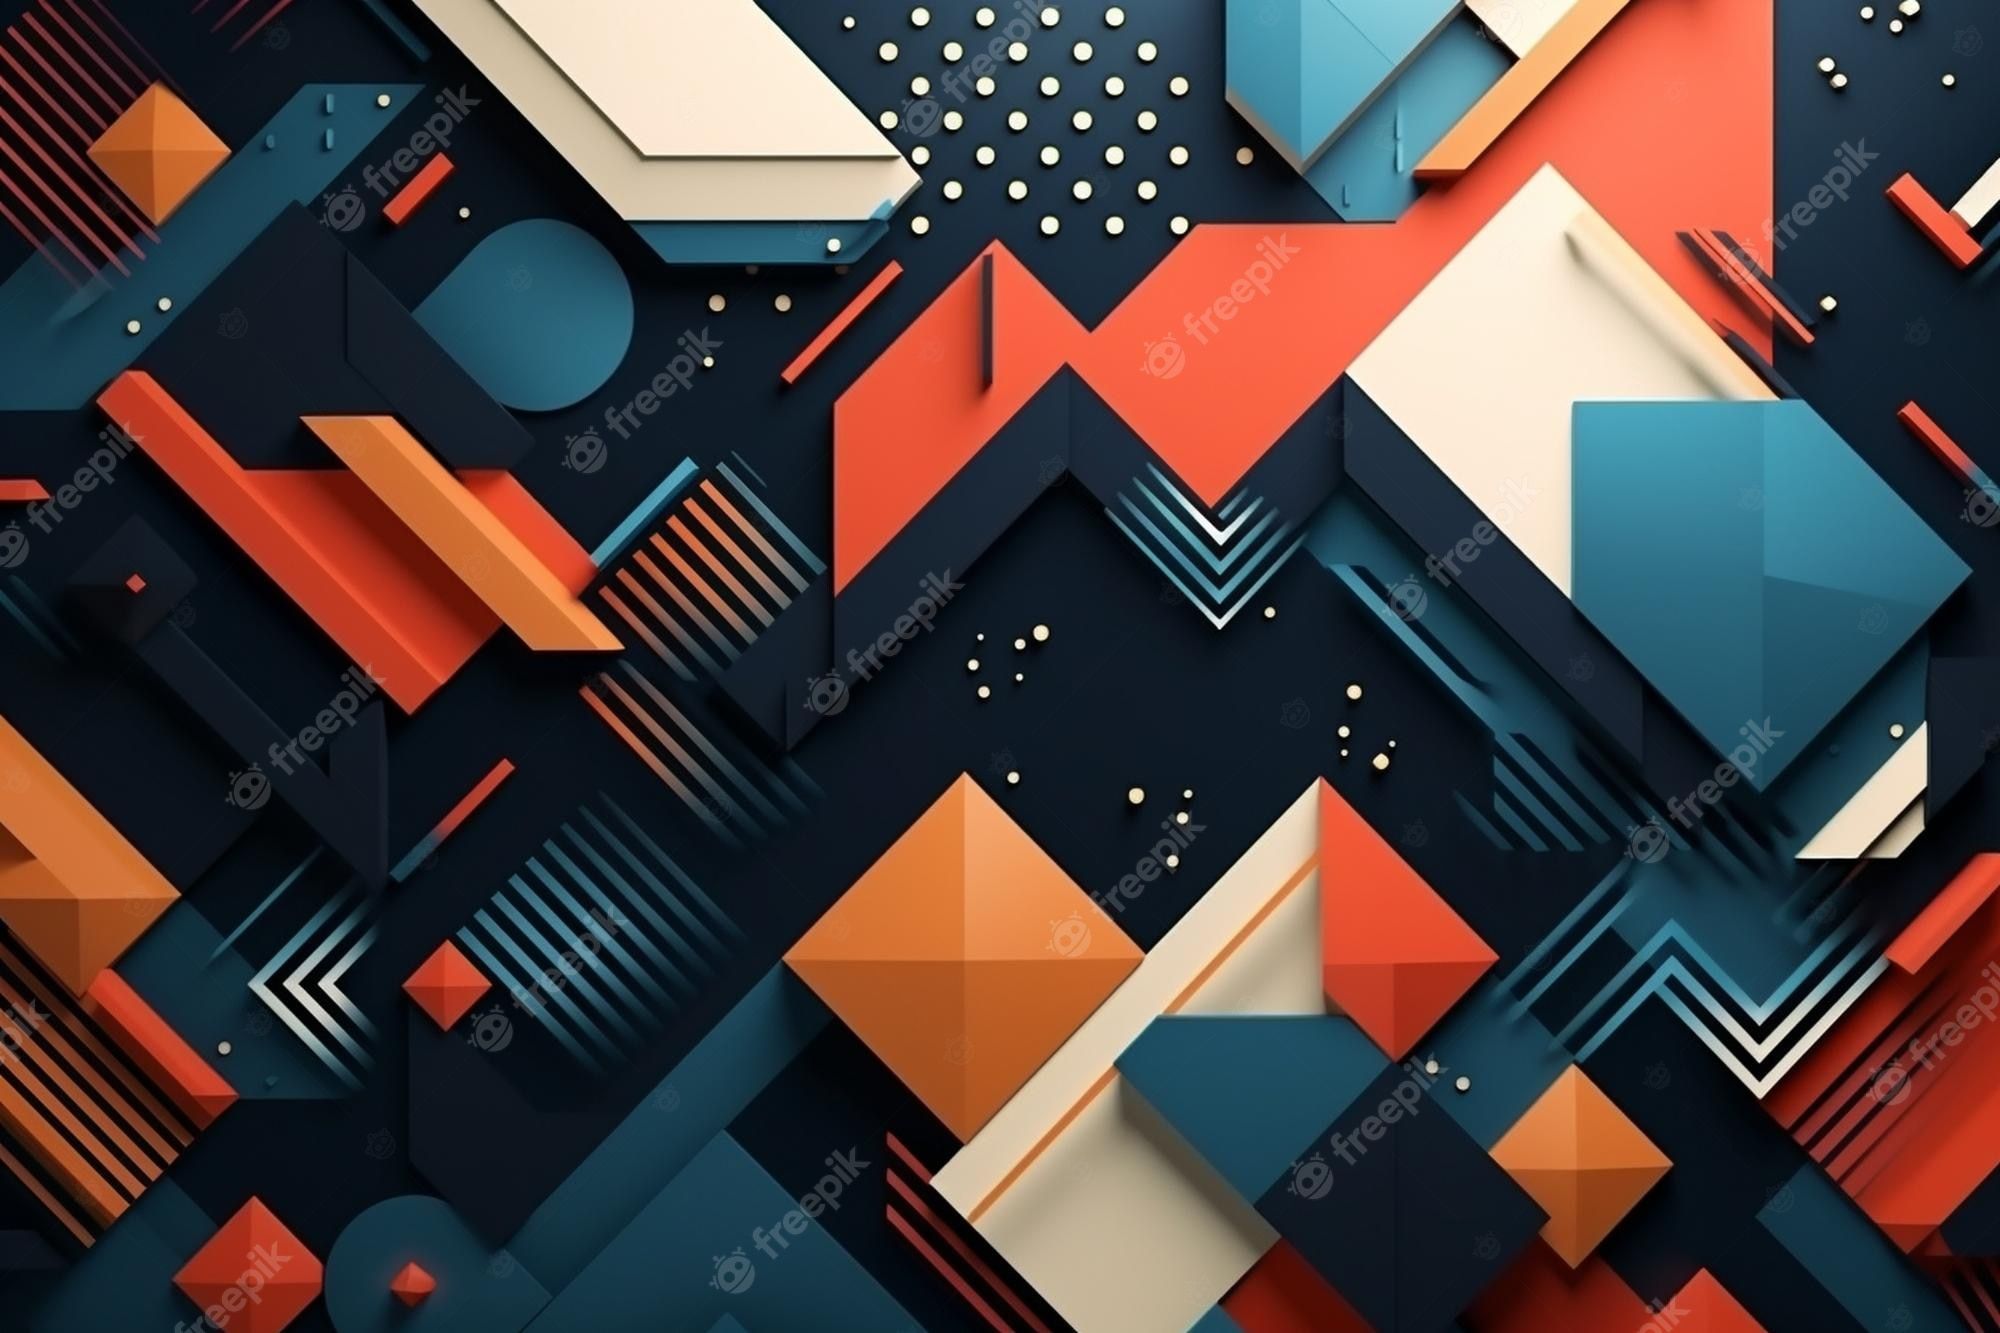 Abstract geometric pattern with colorful shapes - Geometry